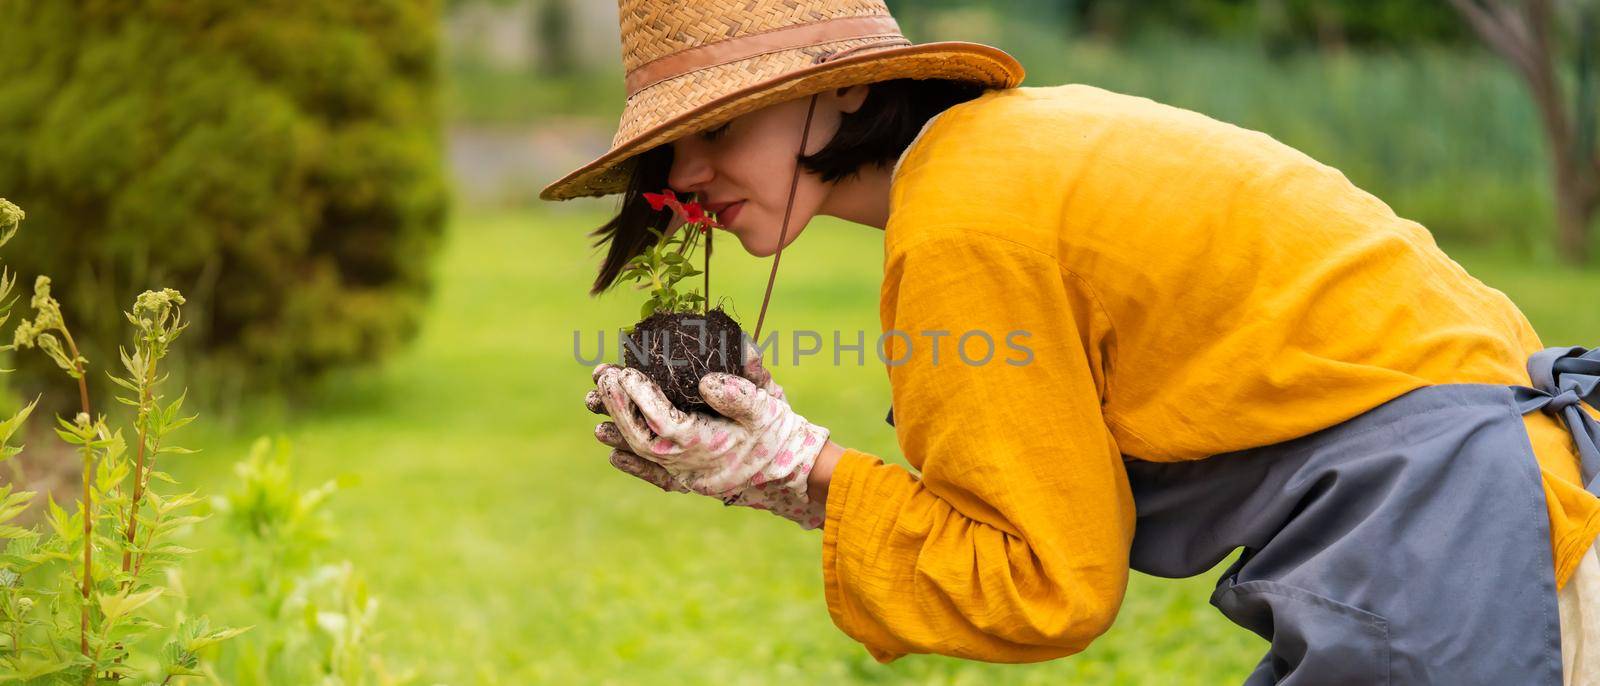 A young woman gardener in a straw hat and hands in gloves is holding a petunia flower in a peat pot, sniffing the flower and smiling before planting a seedling